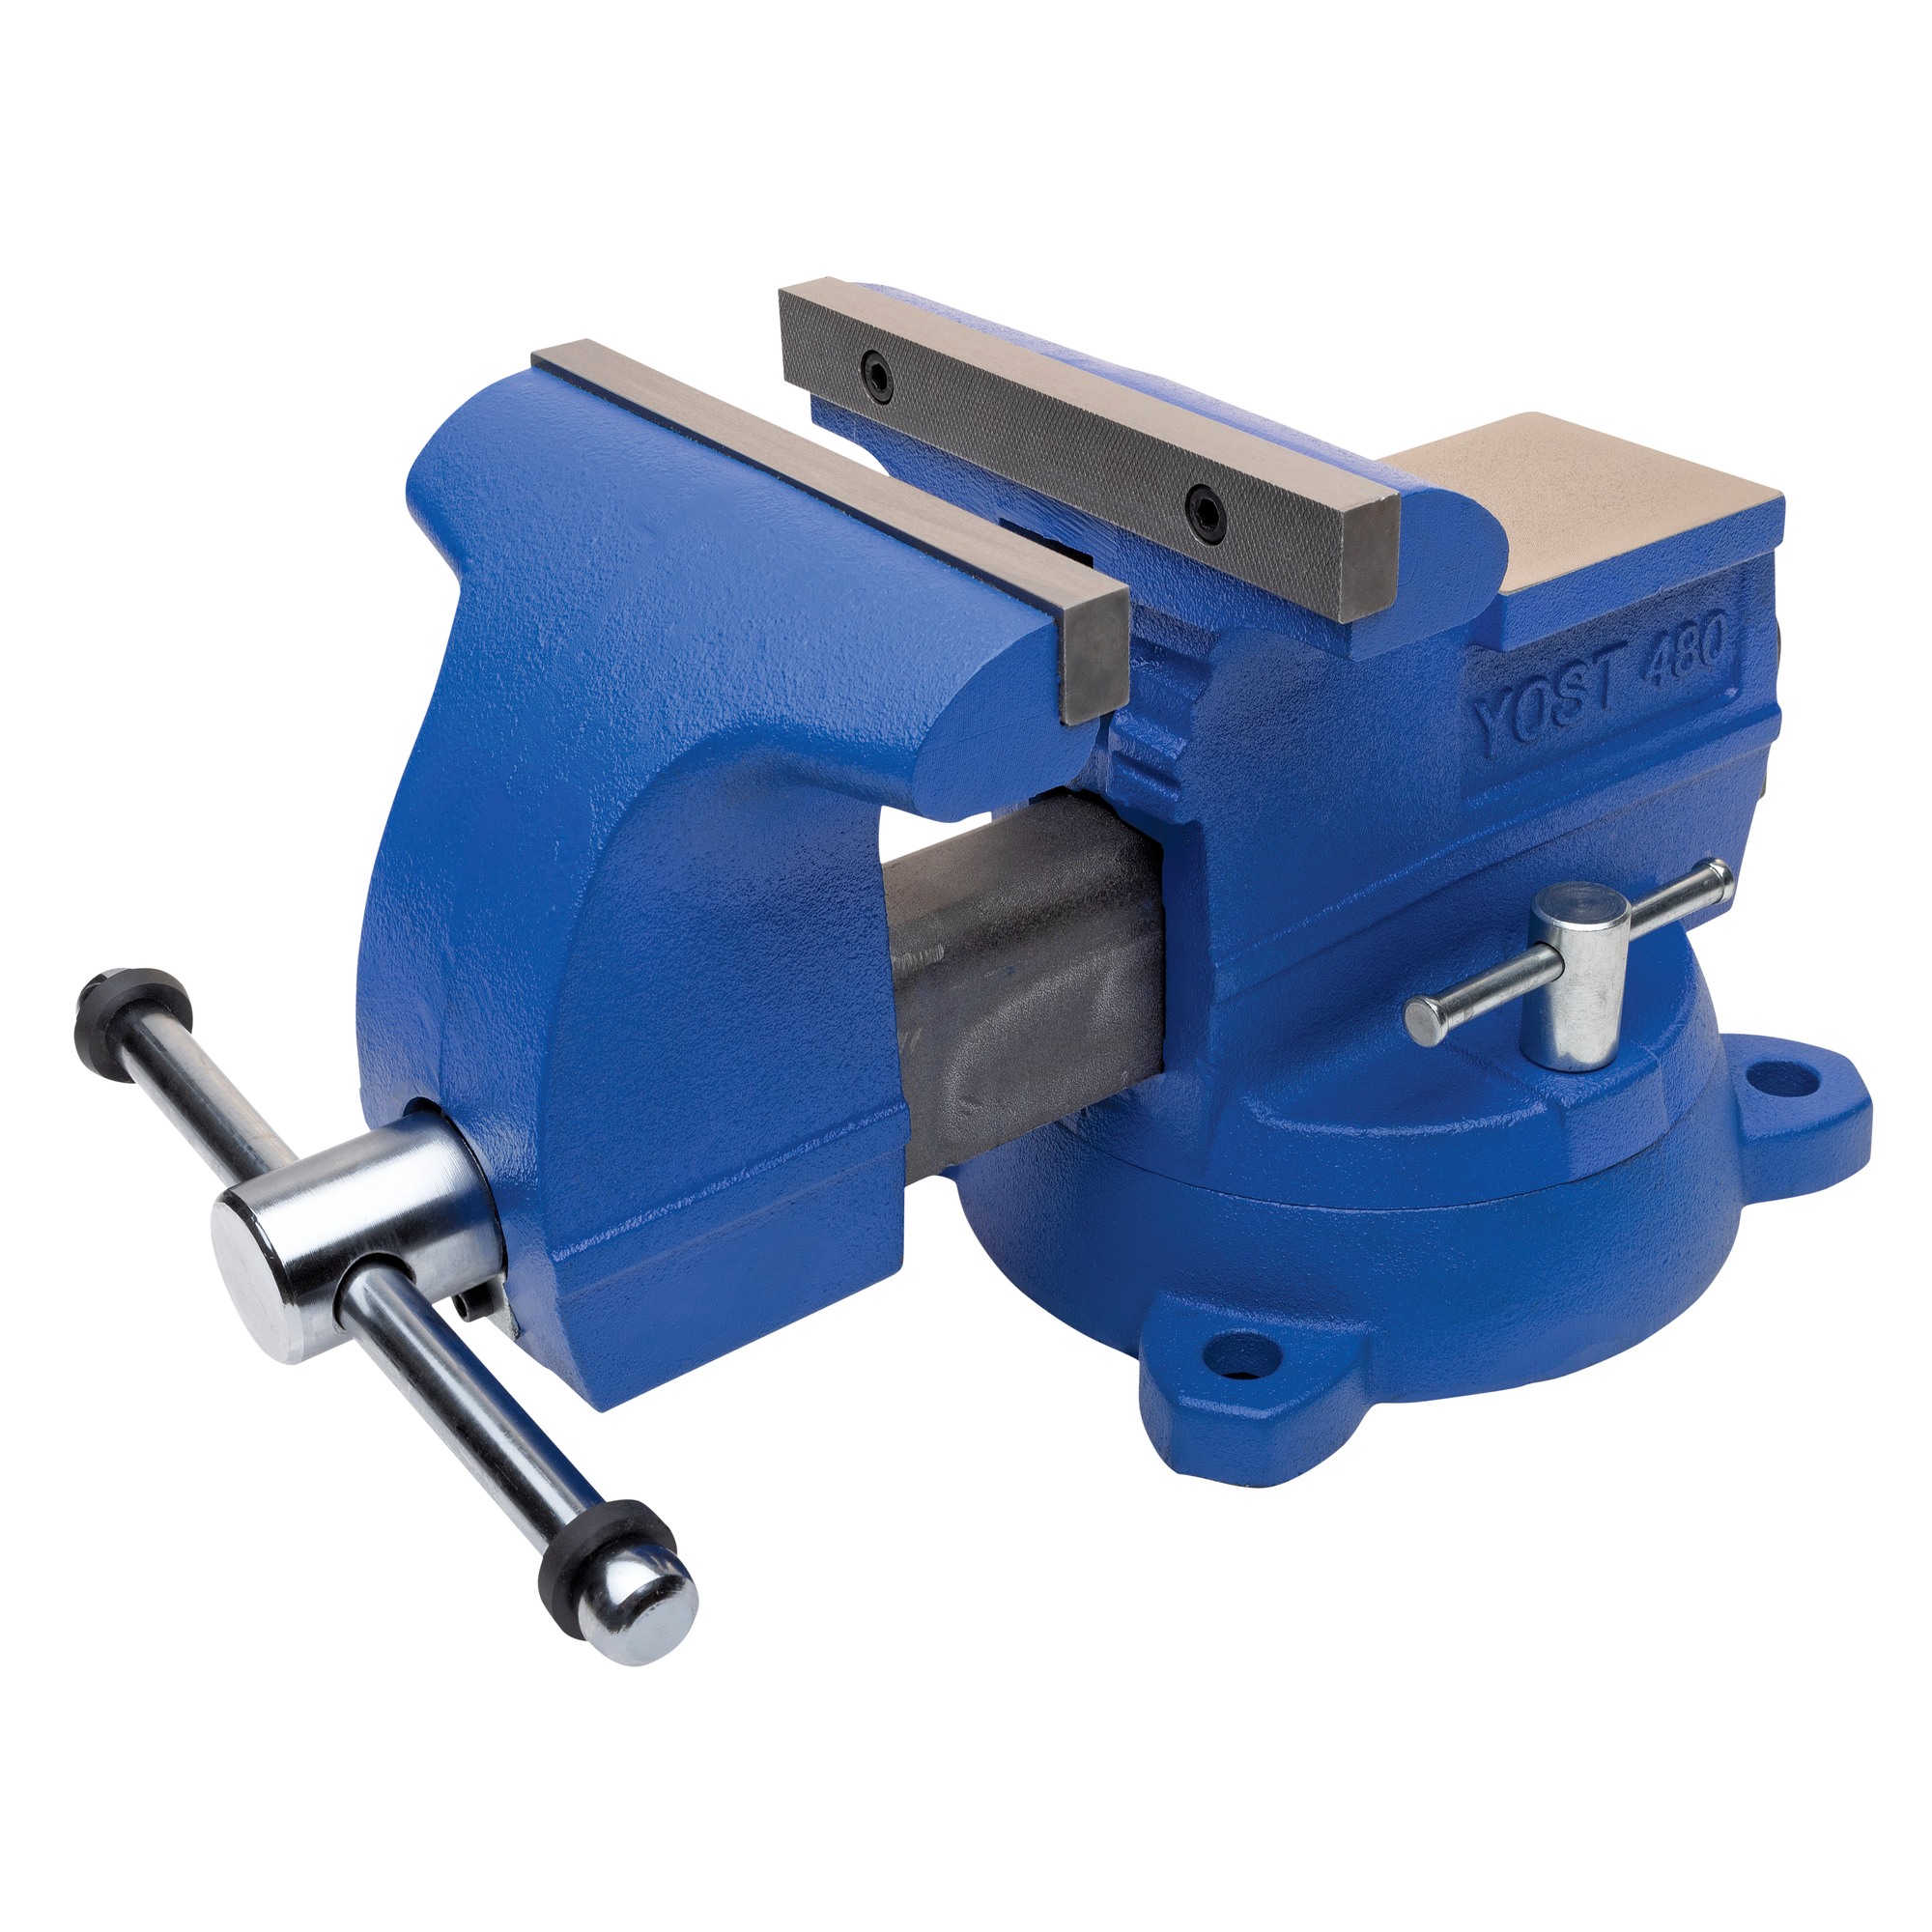 Yost Vises, 8Inch Utility Bench Vise, Jaw Width 8 in, Material Cast Iron, Model 480